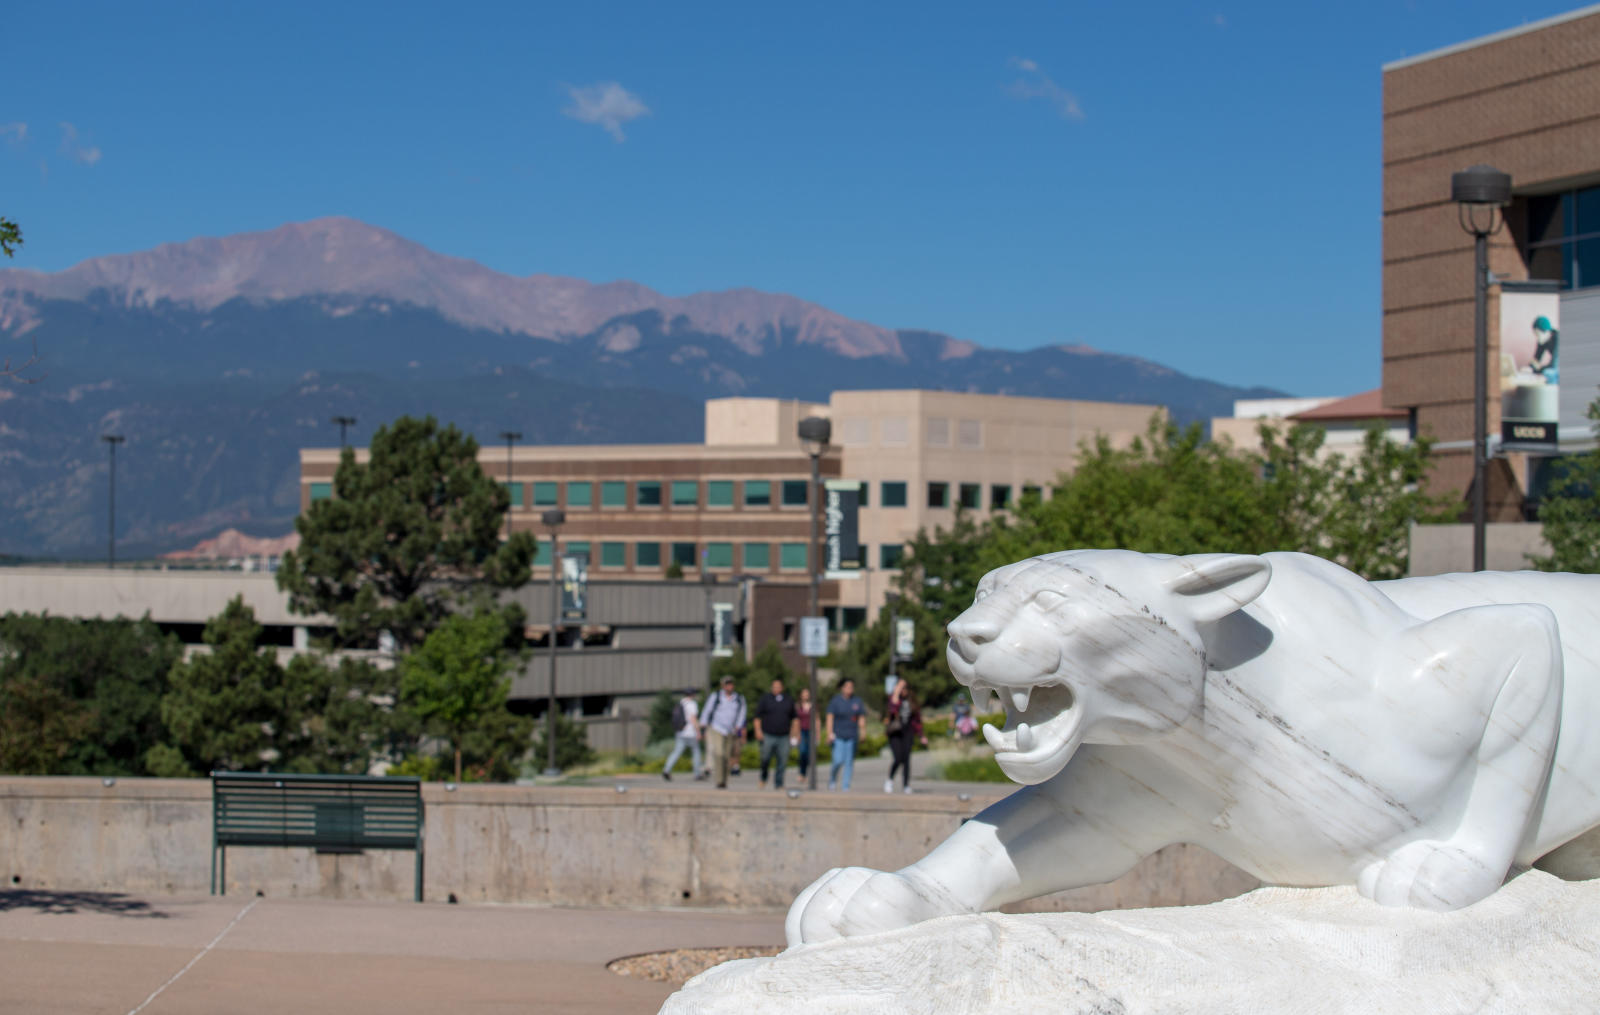 UCCS campus with a mountain lion sculpture in the foreground